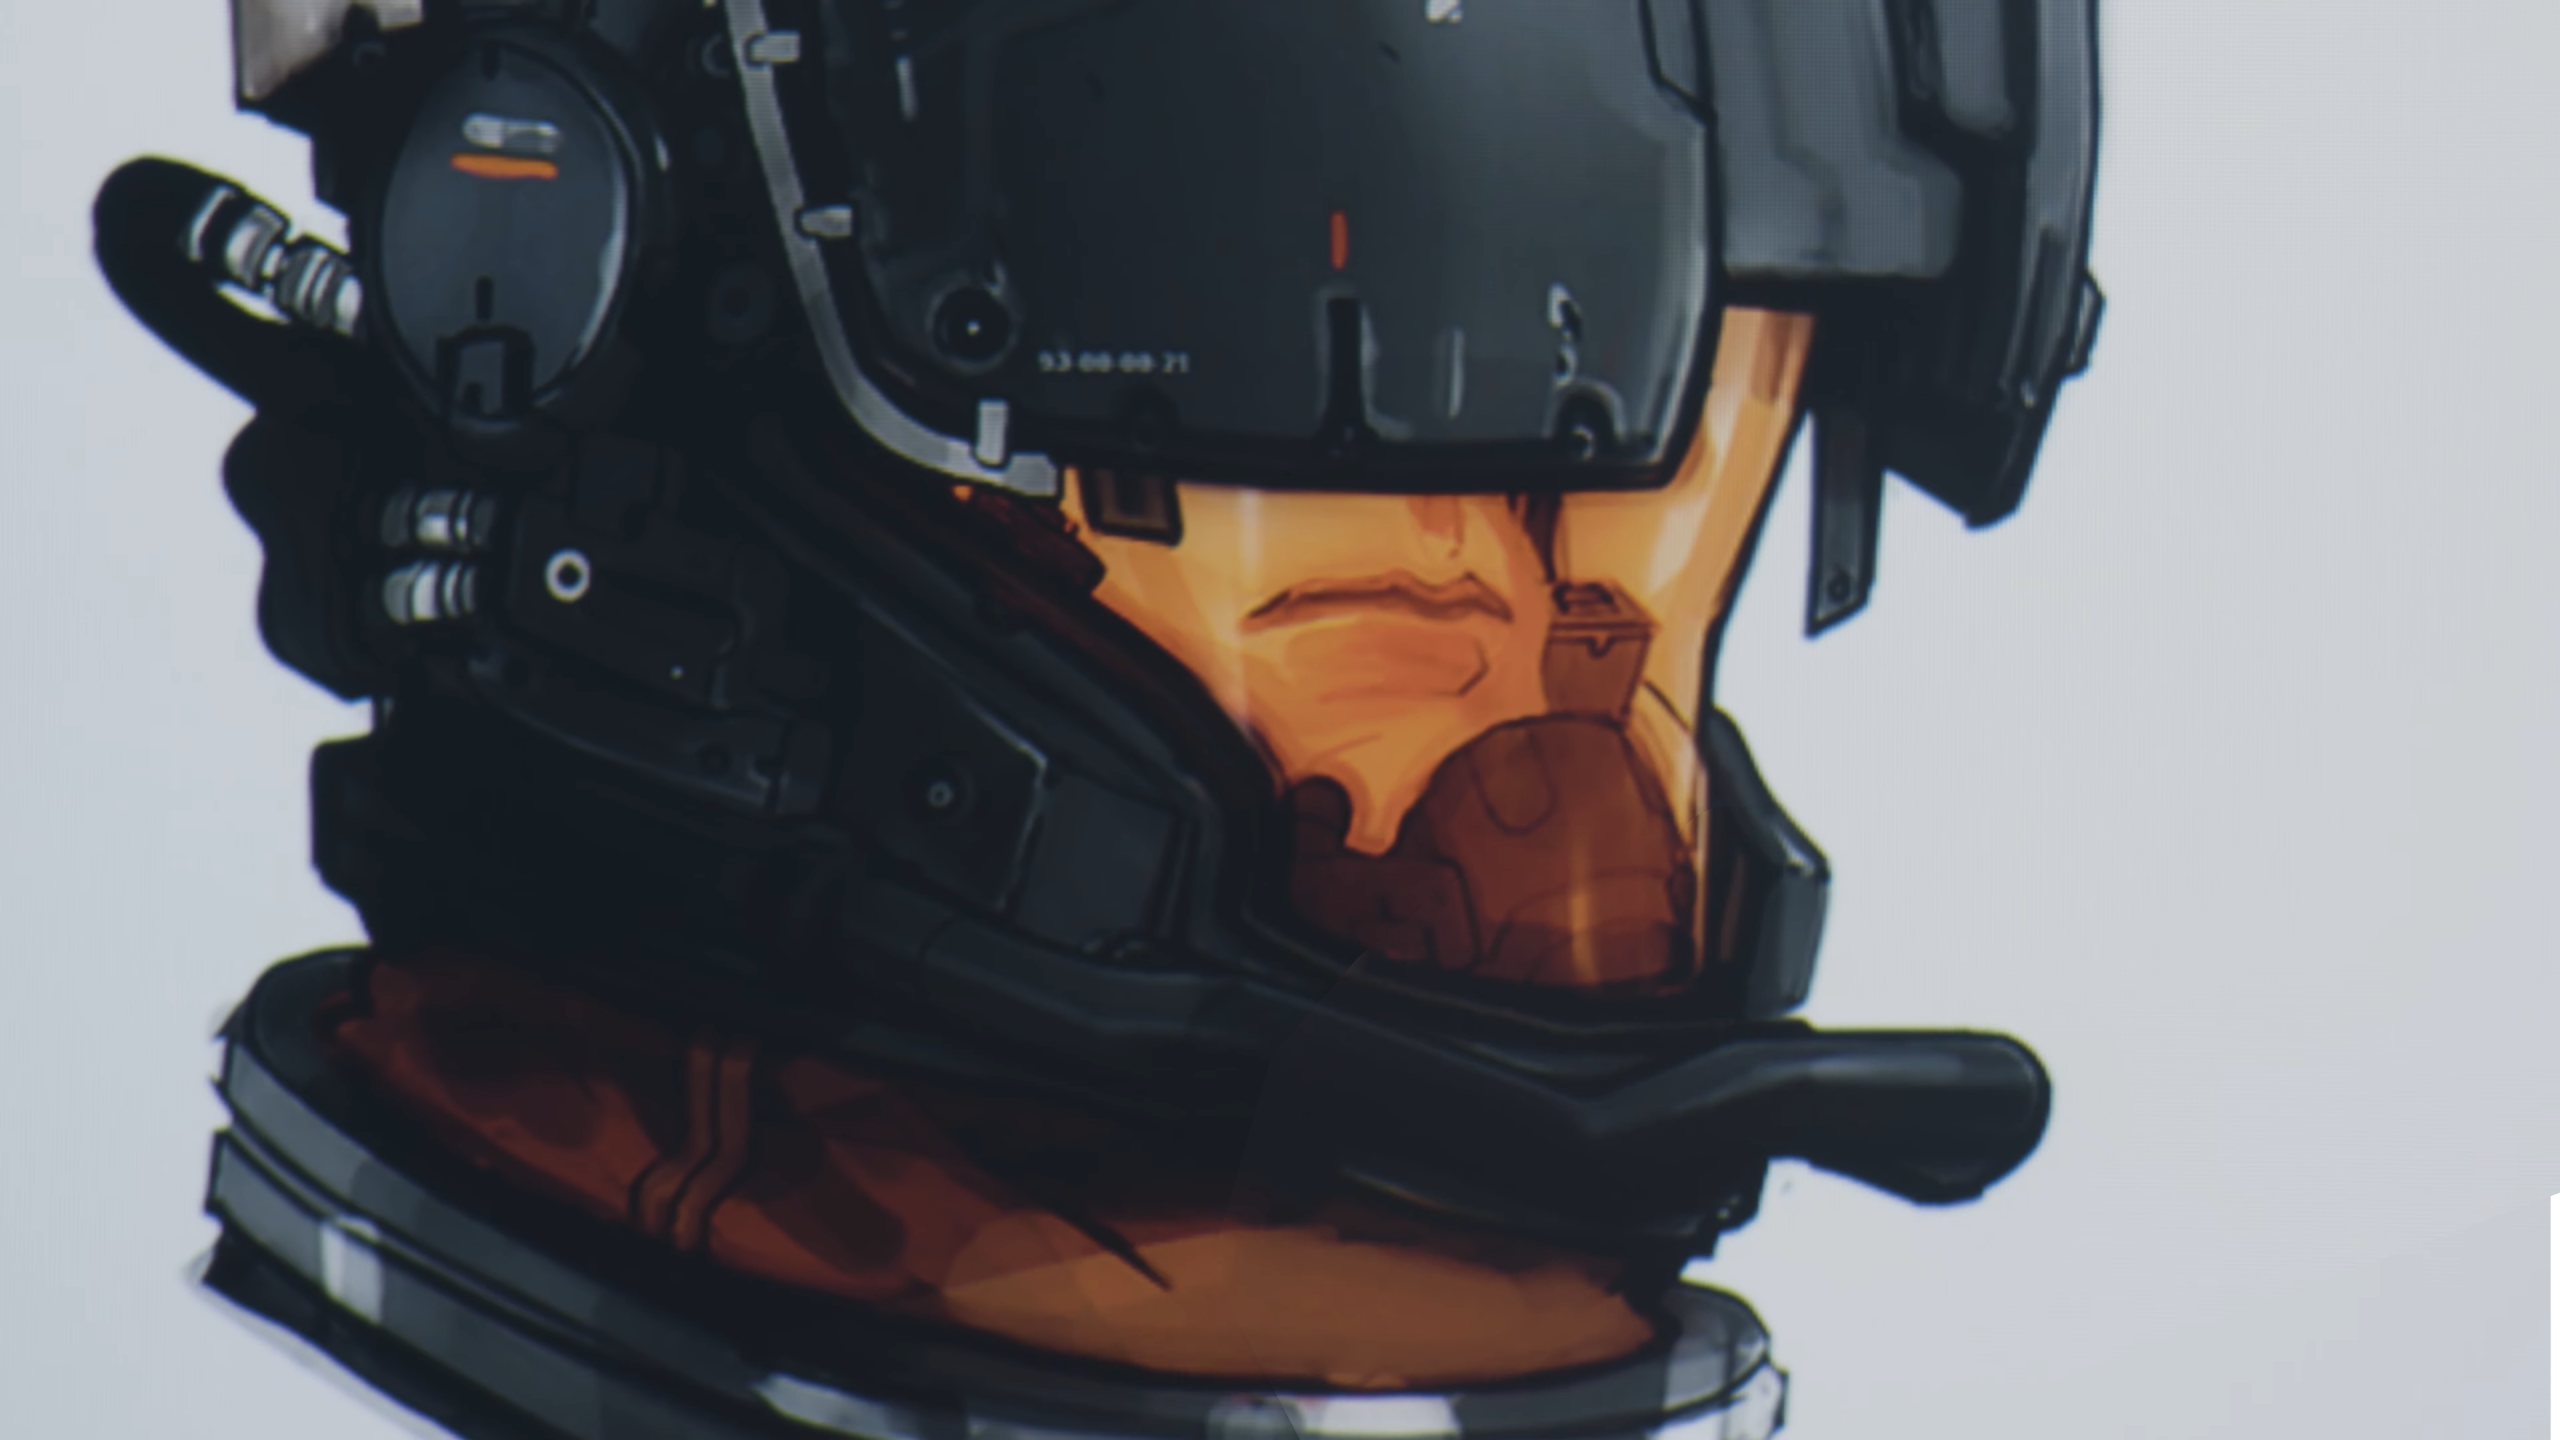 Drawn and painted Starfield concept art of character wearing helmet